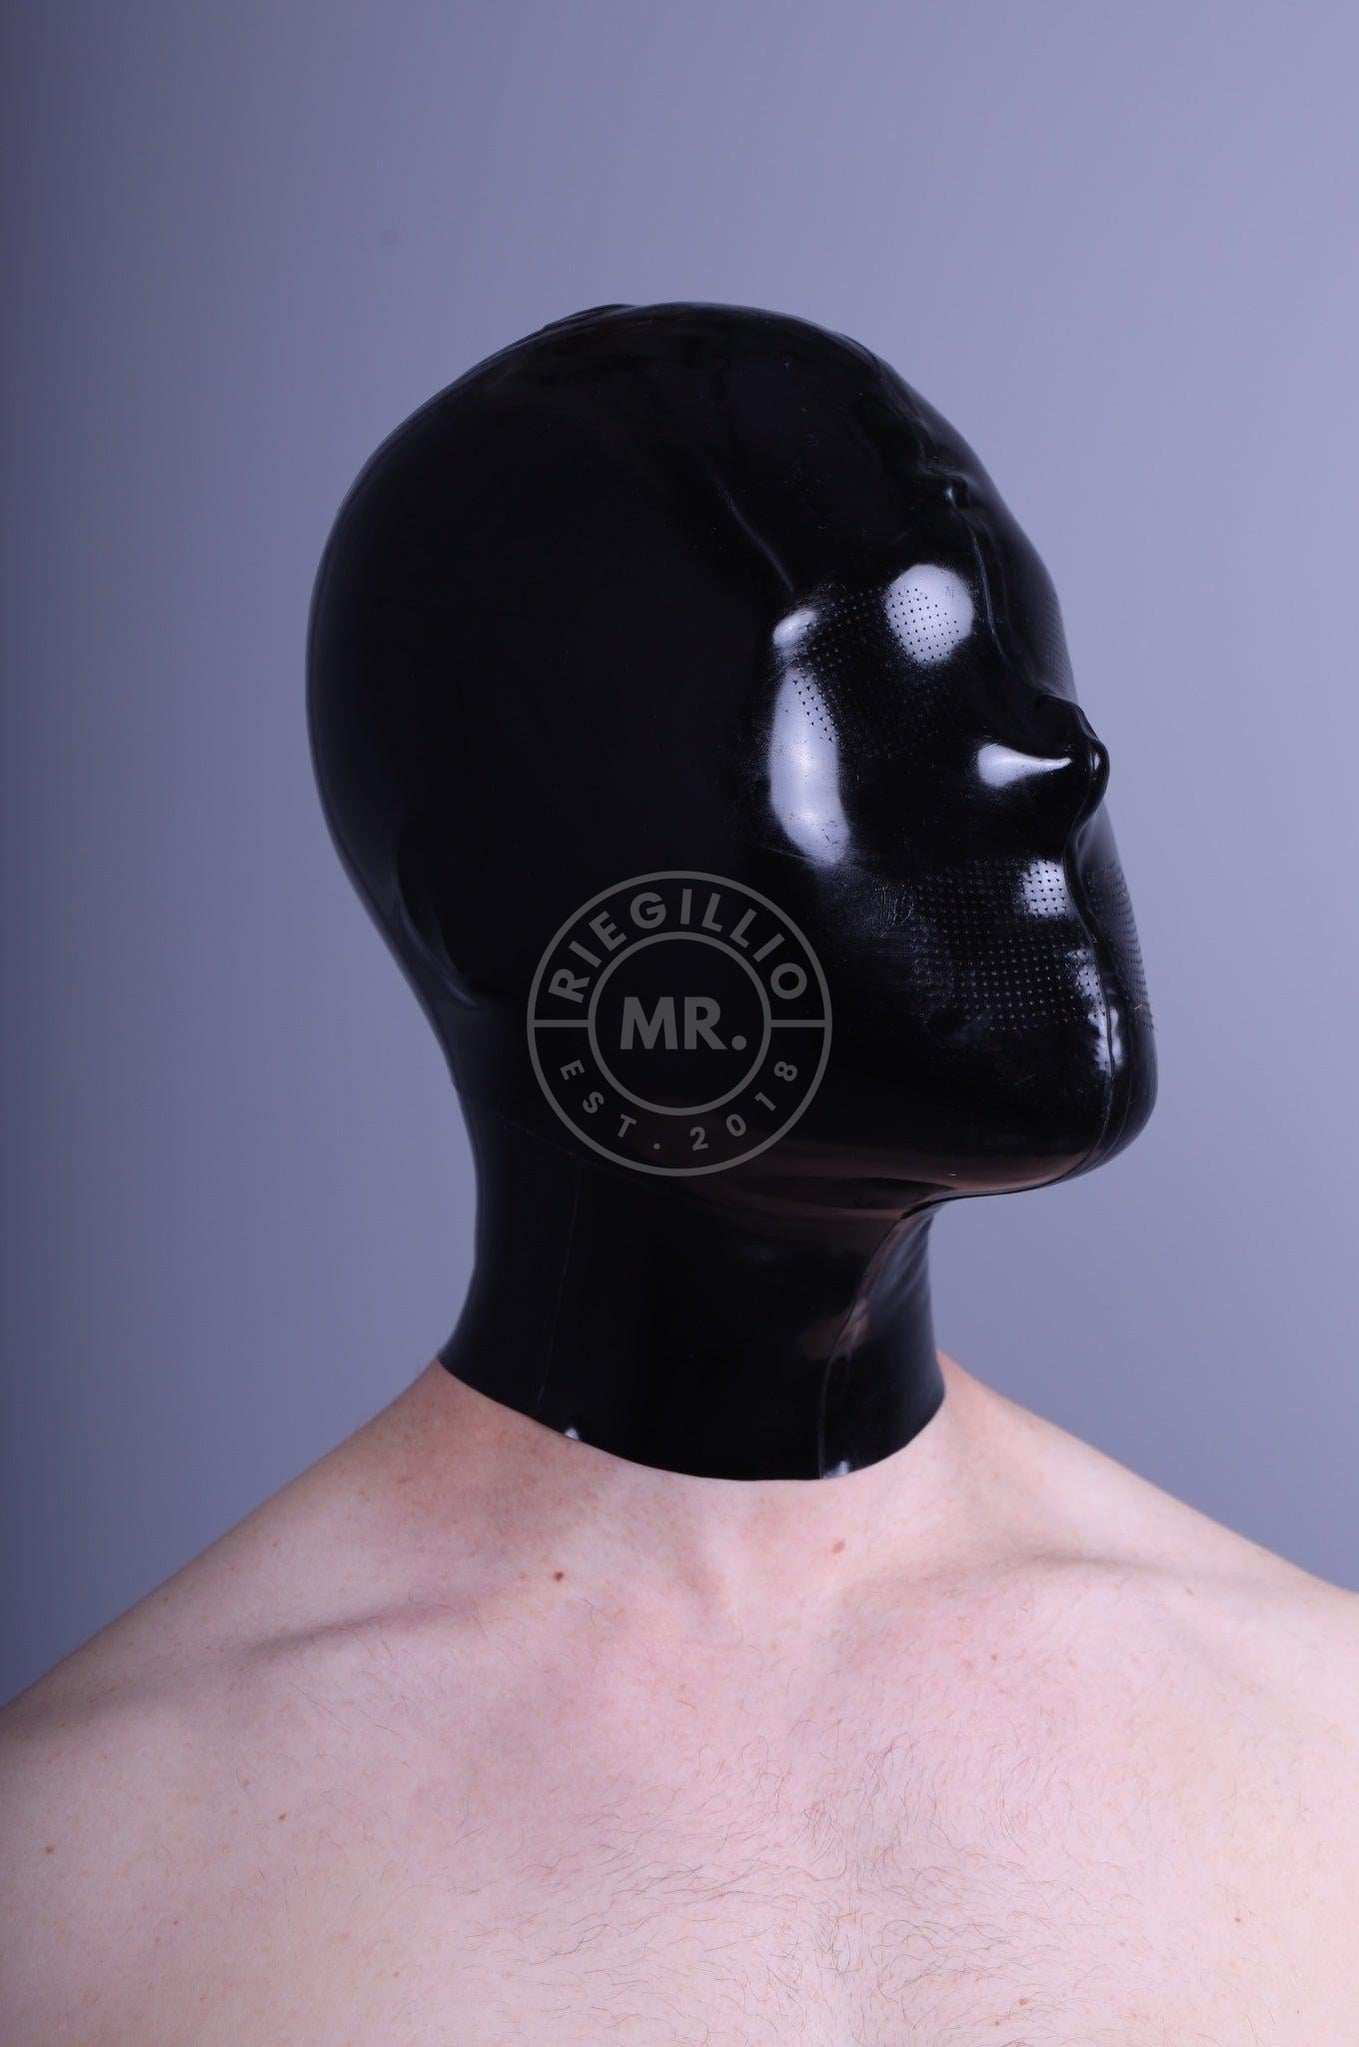 Rubber Micro Perforated Hood With Zip at MR. Riegillio